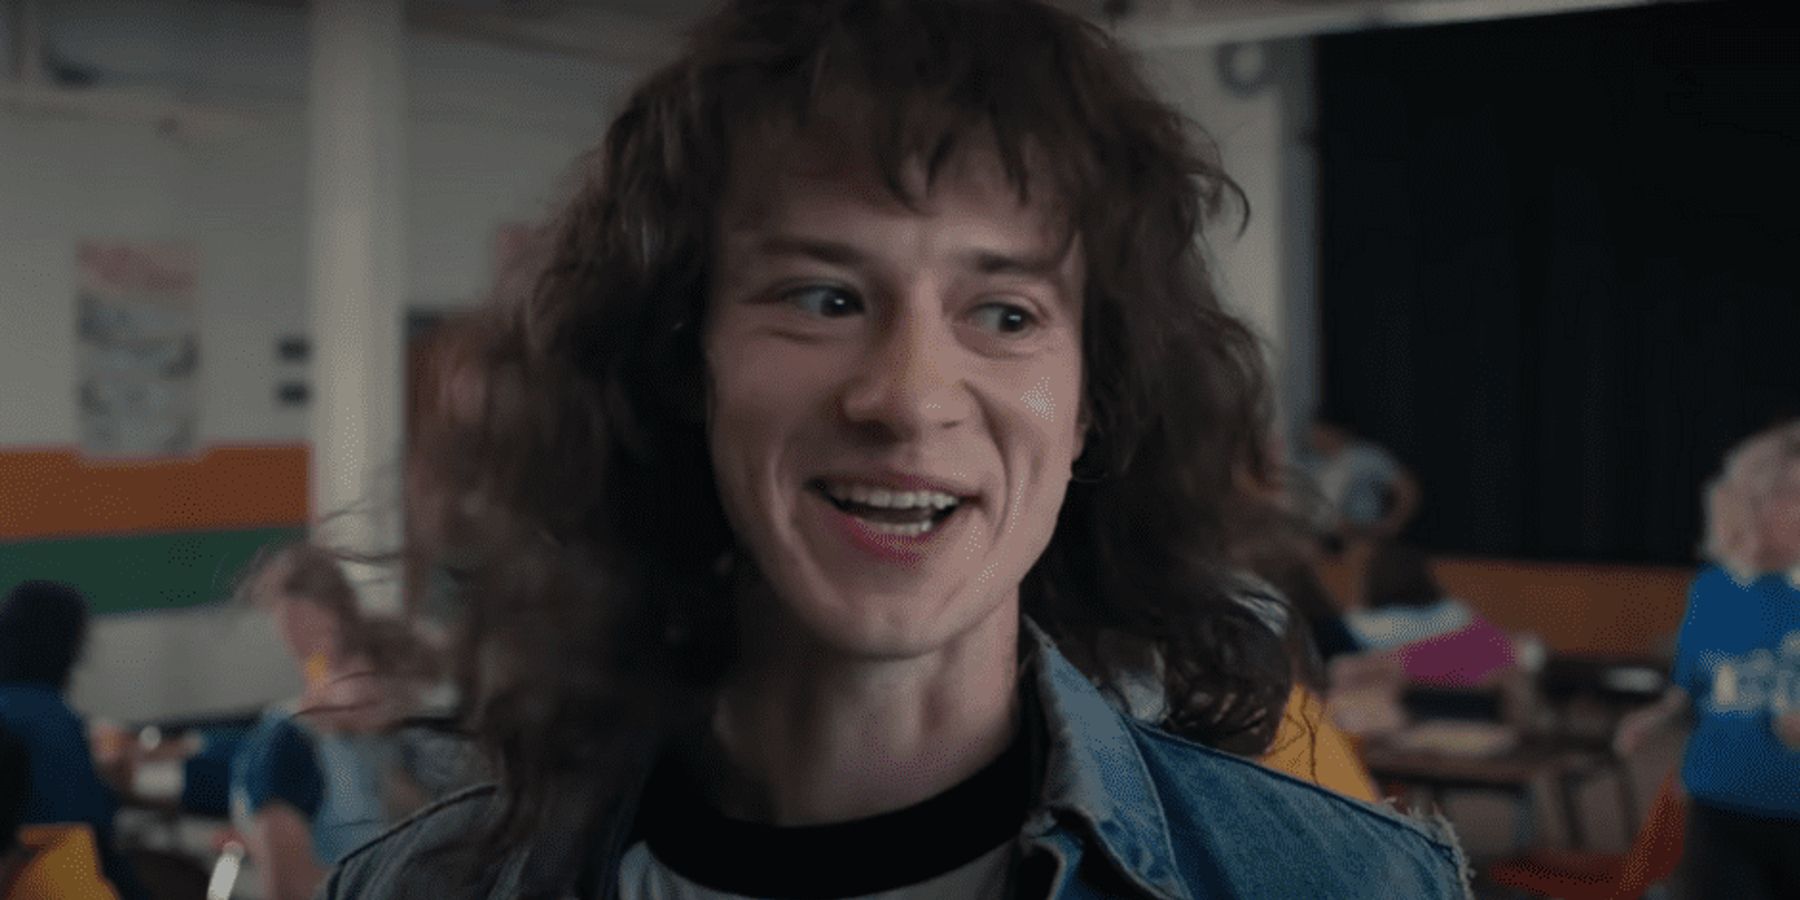 Stranger Things Final Season Confirmed To Have 8 Episodes, Fans Convinced  Eddie Munson Will Return As Kas - FandomWire